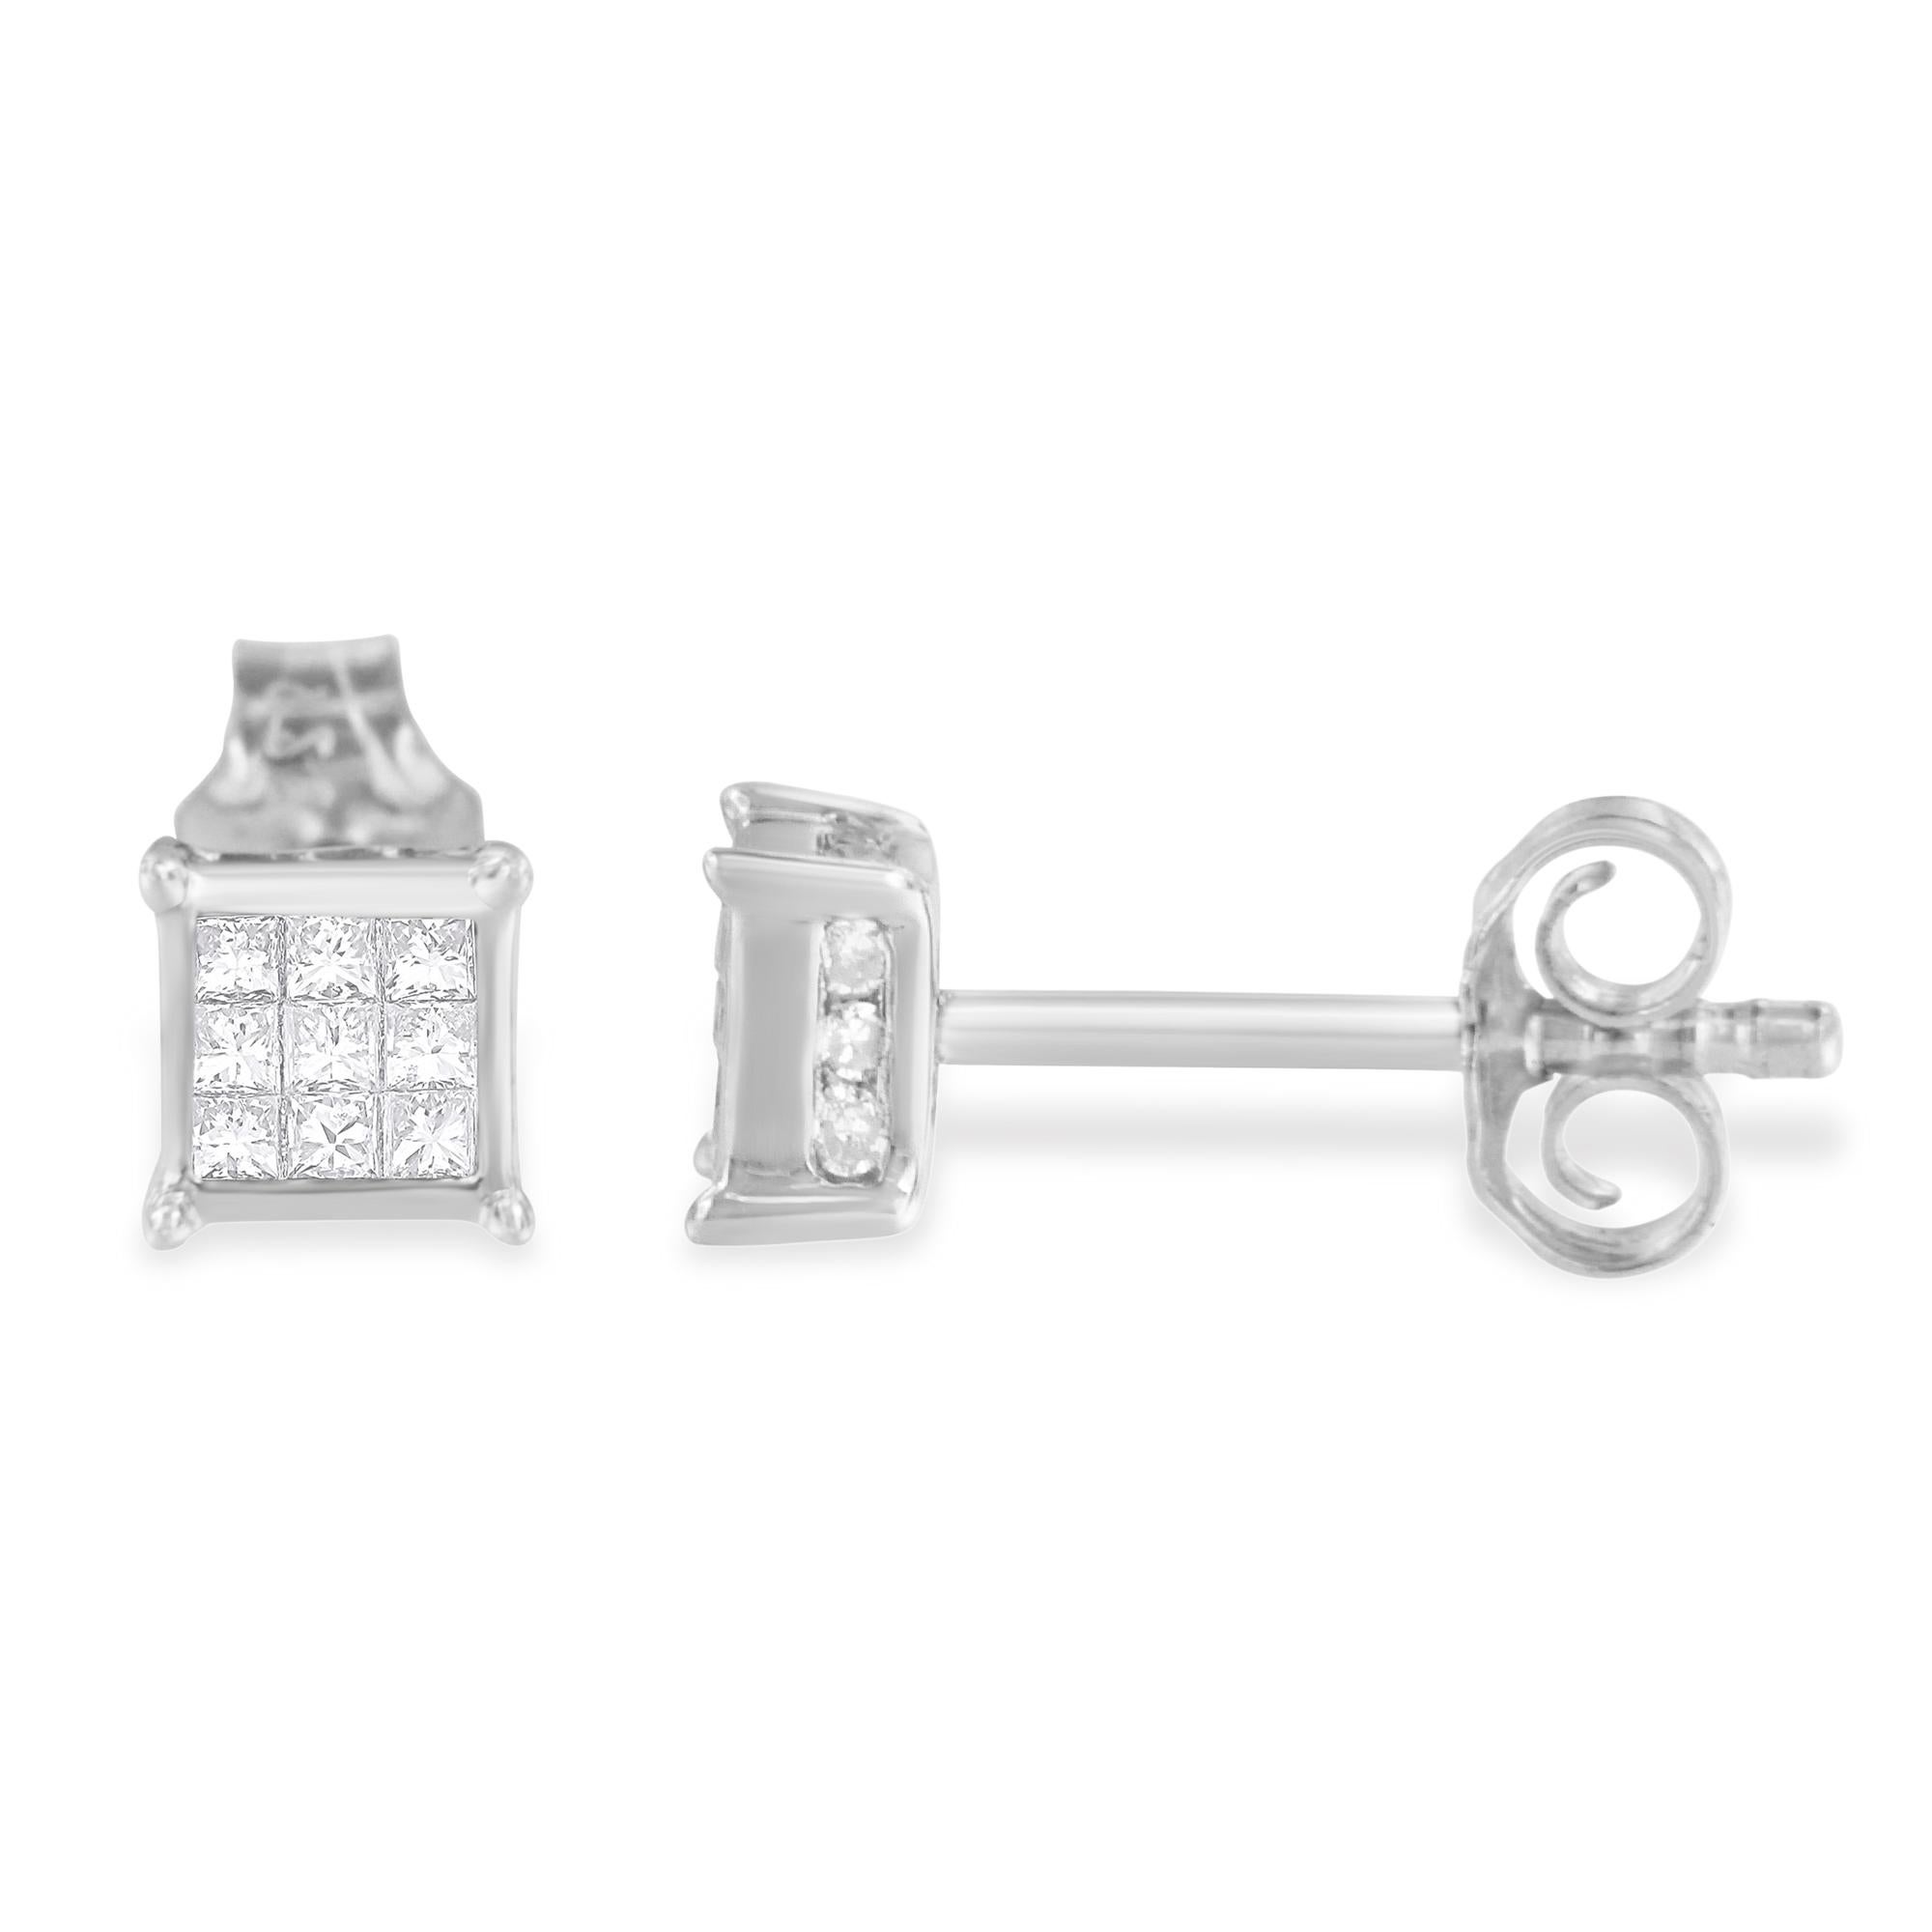 Capturing the brilliance, these square framed stud earrings are composed of precious sterling silver. Designed with extreme elegance, the earrings have the adornment of princess cut diamonds that are fixed in an invisible setting. Subtle yet